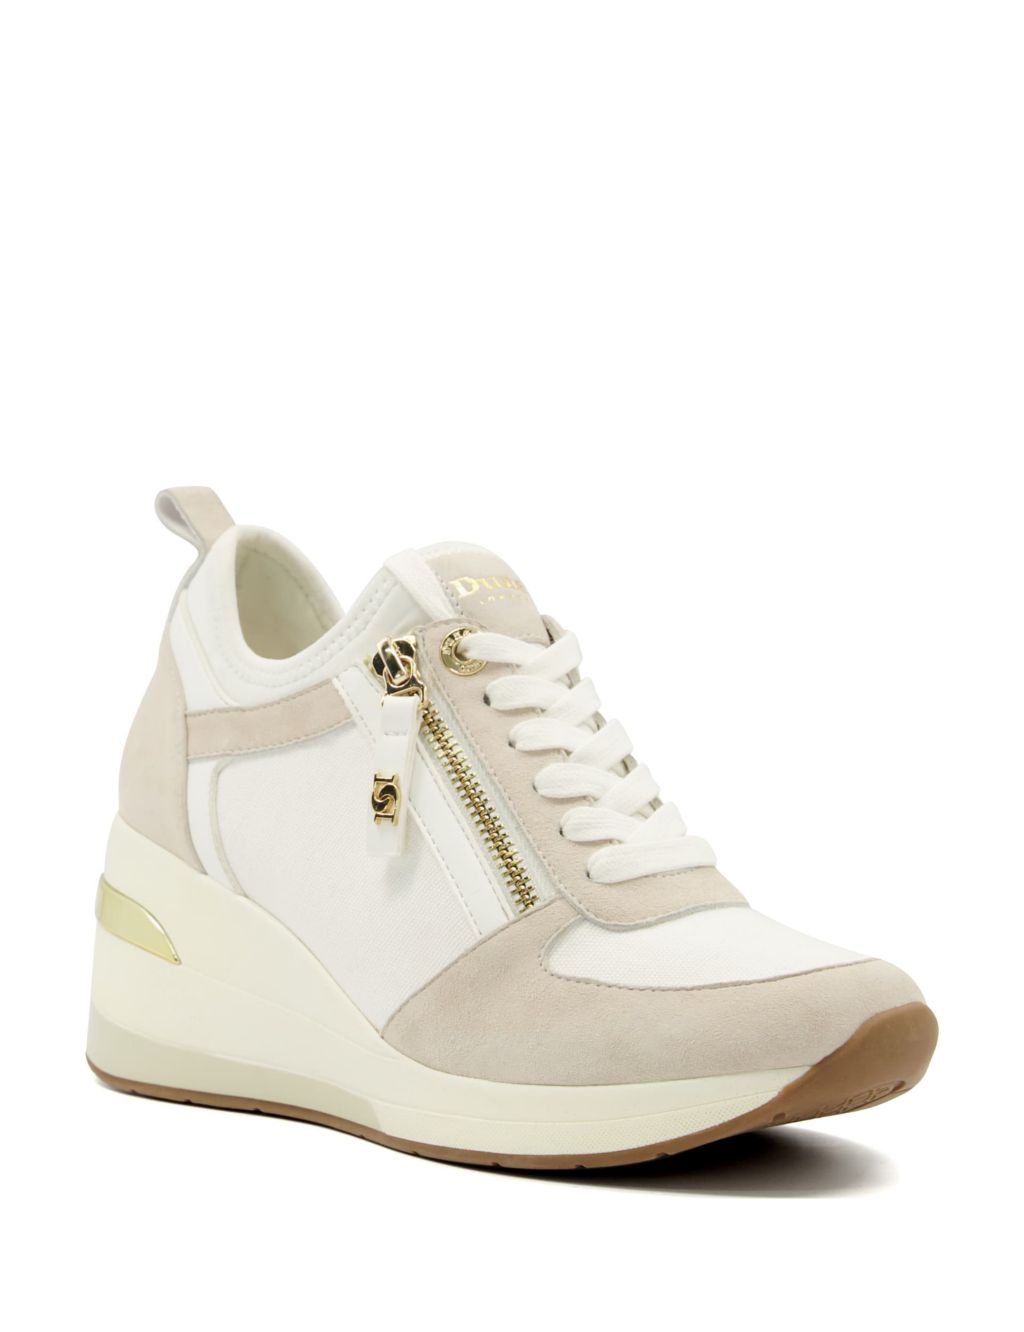 Leather Wedge Suede Panel Trainers image 2